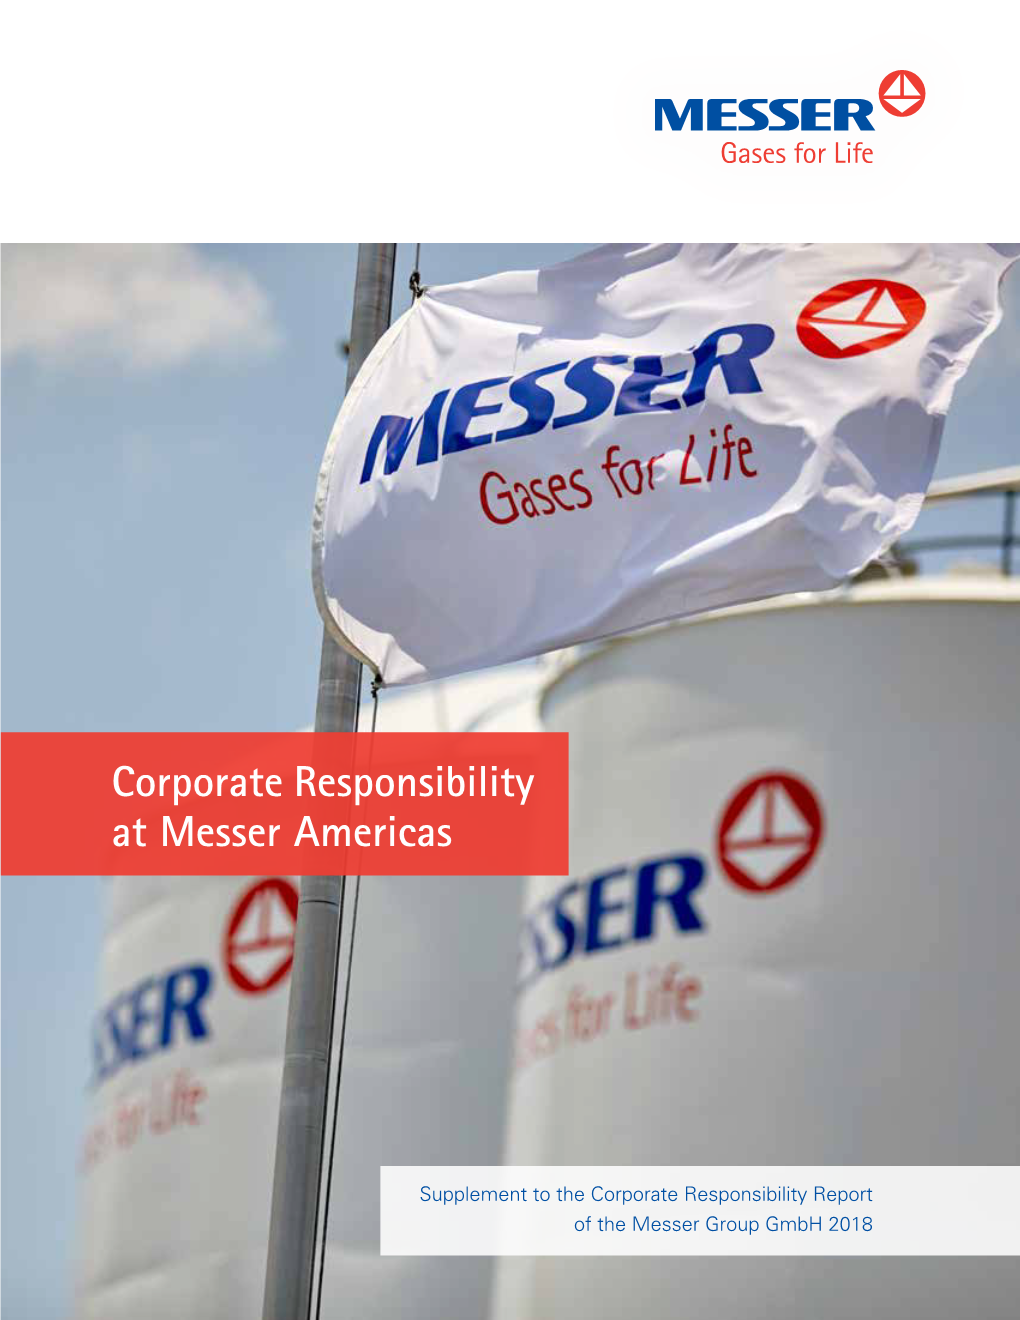 Corporate Responsibility at Messer Americas